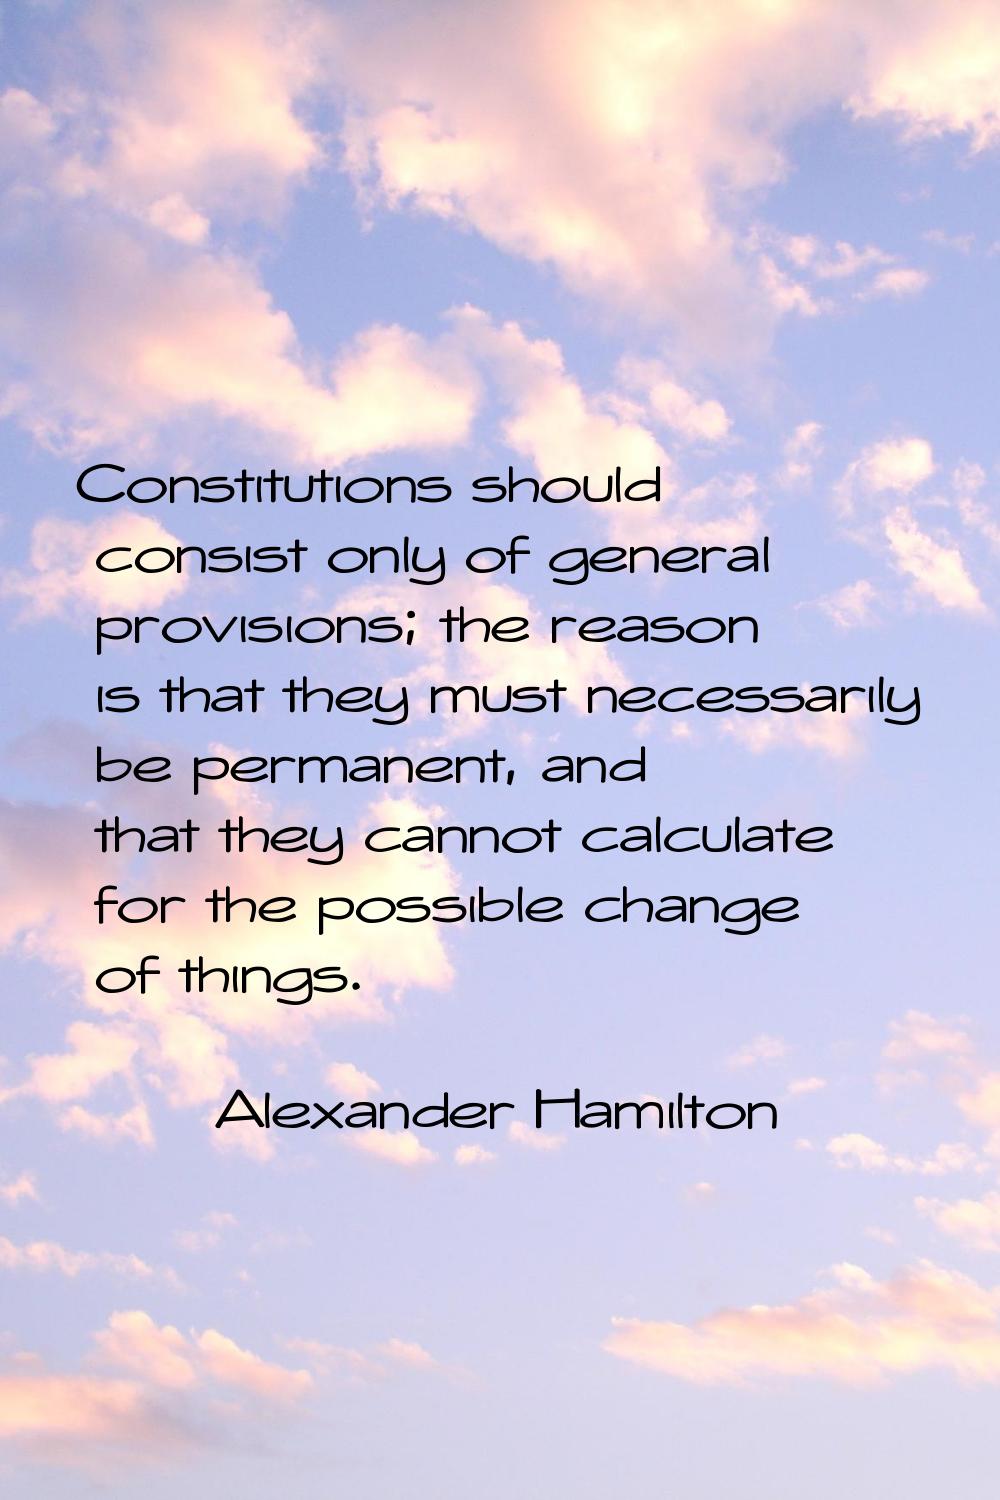 Constitutions should consist only of general provisions; the reason is that they must necessarily b